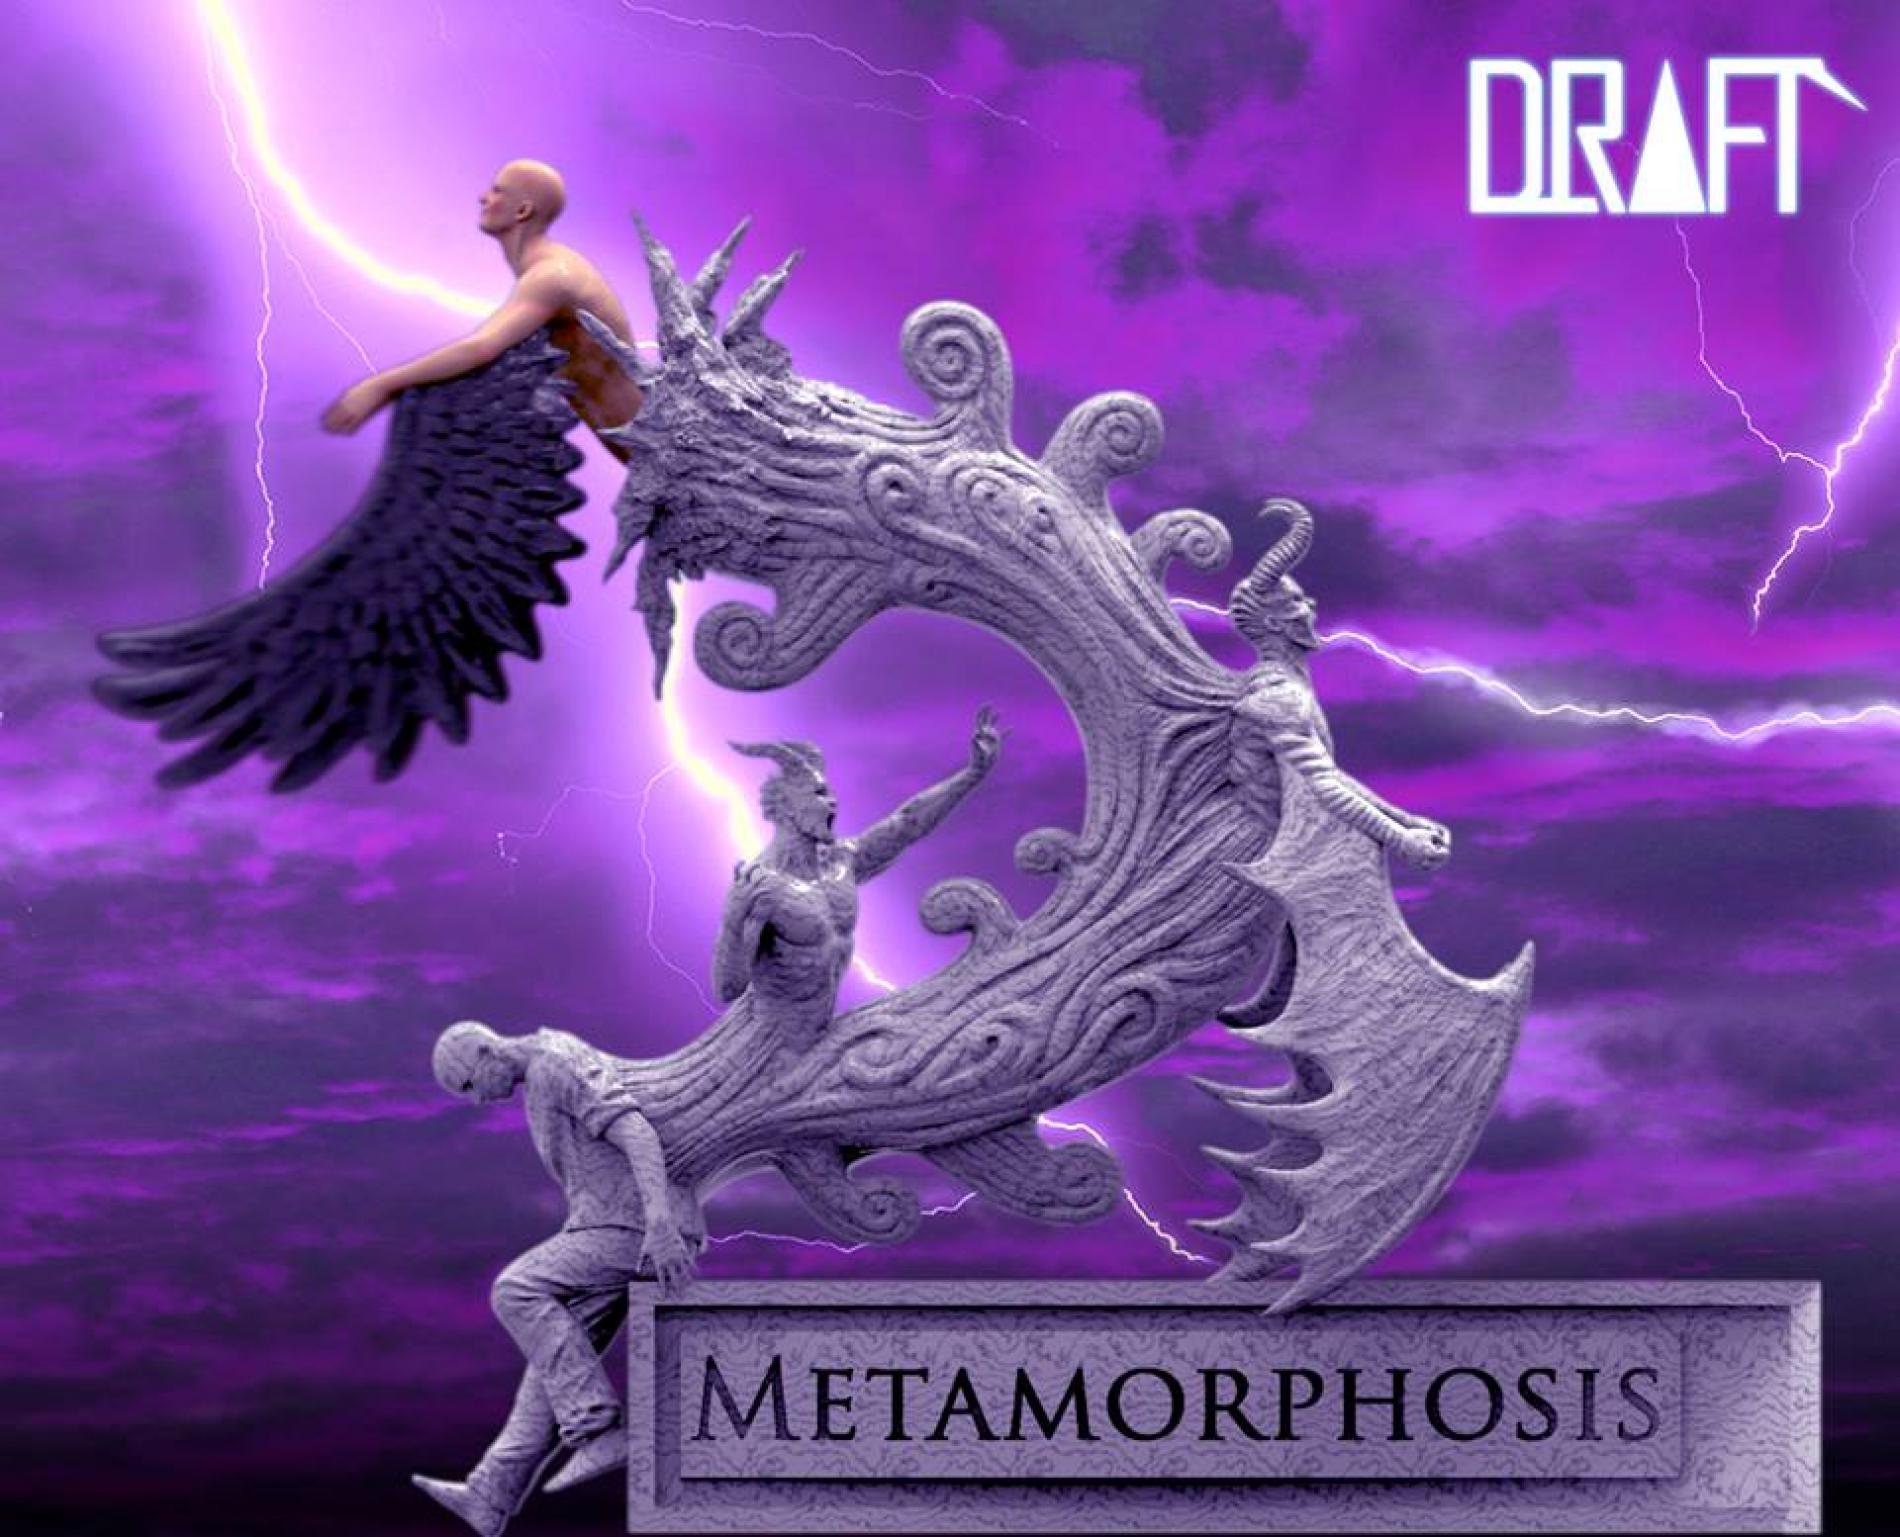 Check Out The EP By Draft: Metamorphosis